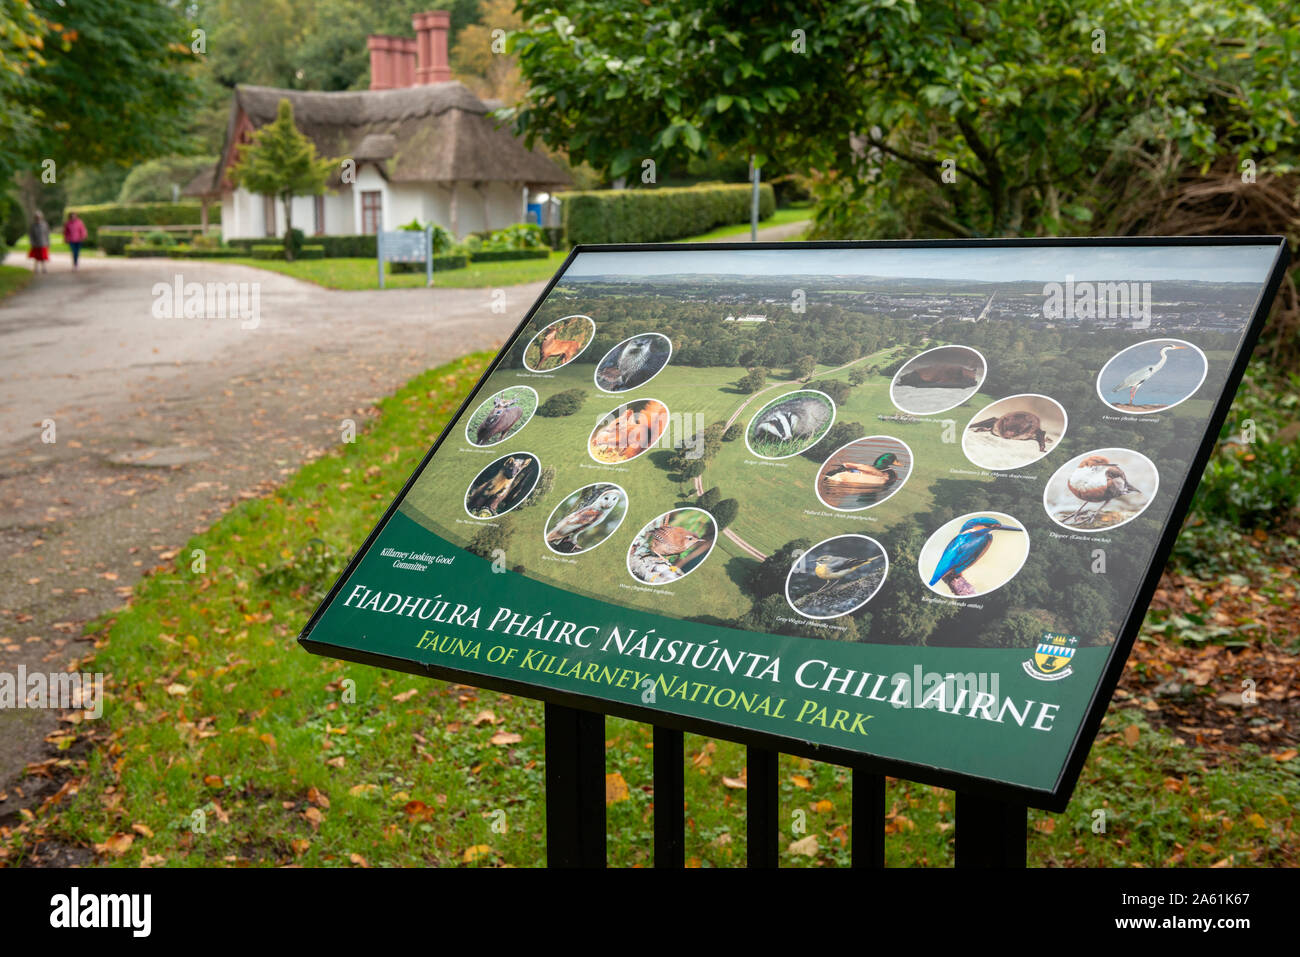 Fauna of Killarney National Park information board sign with pictures of the local animals at the Deenagh Cottage, Knockreer Estate Killarney, Ireland Stock Photo